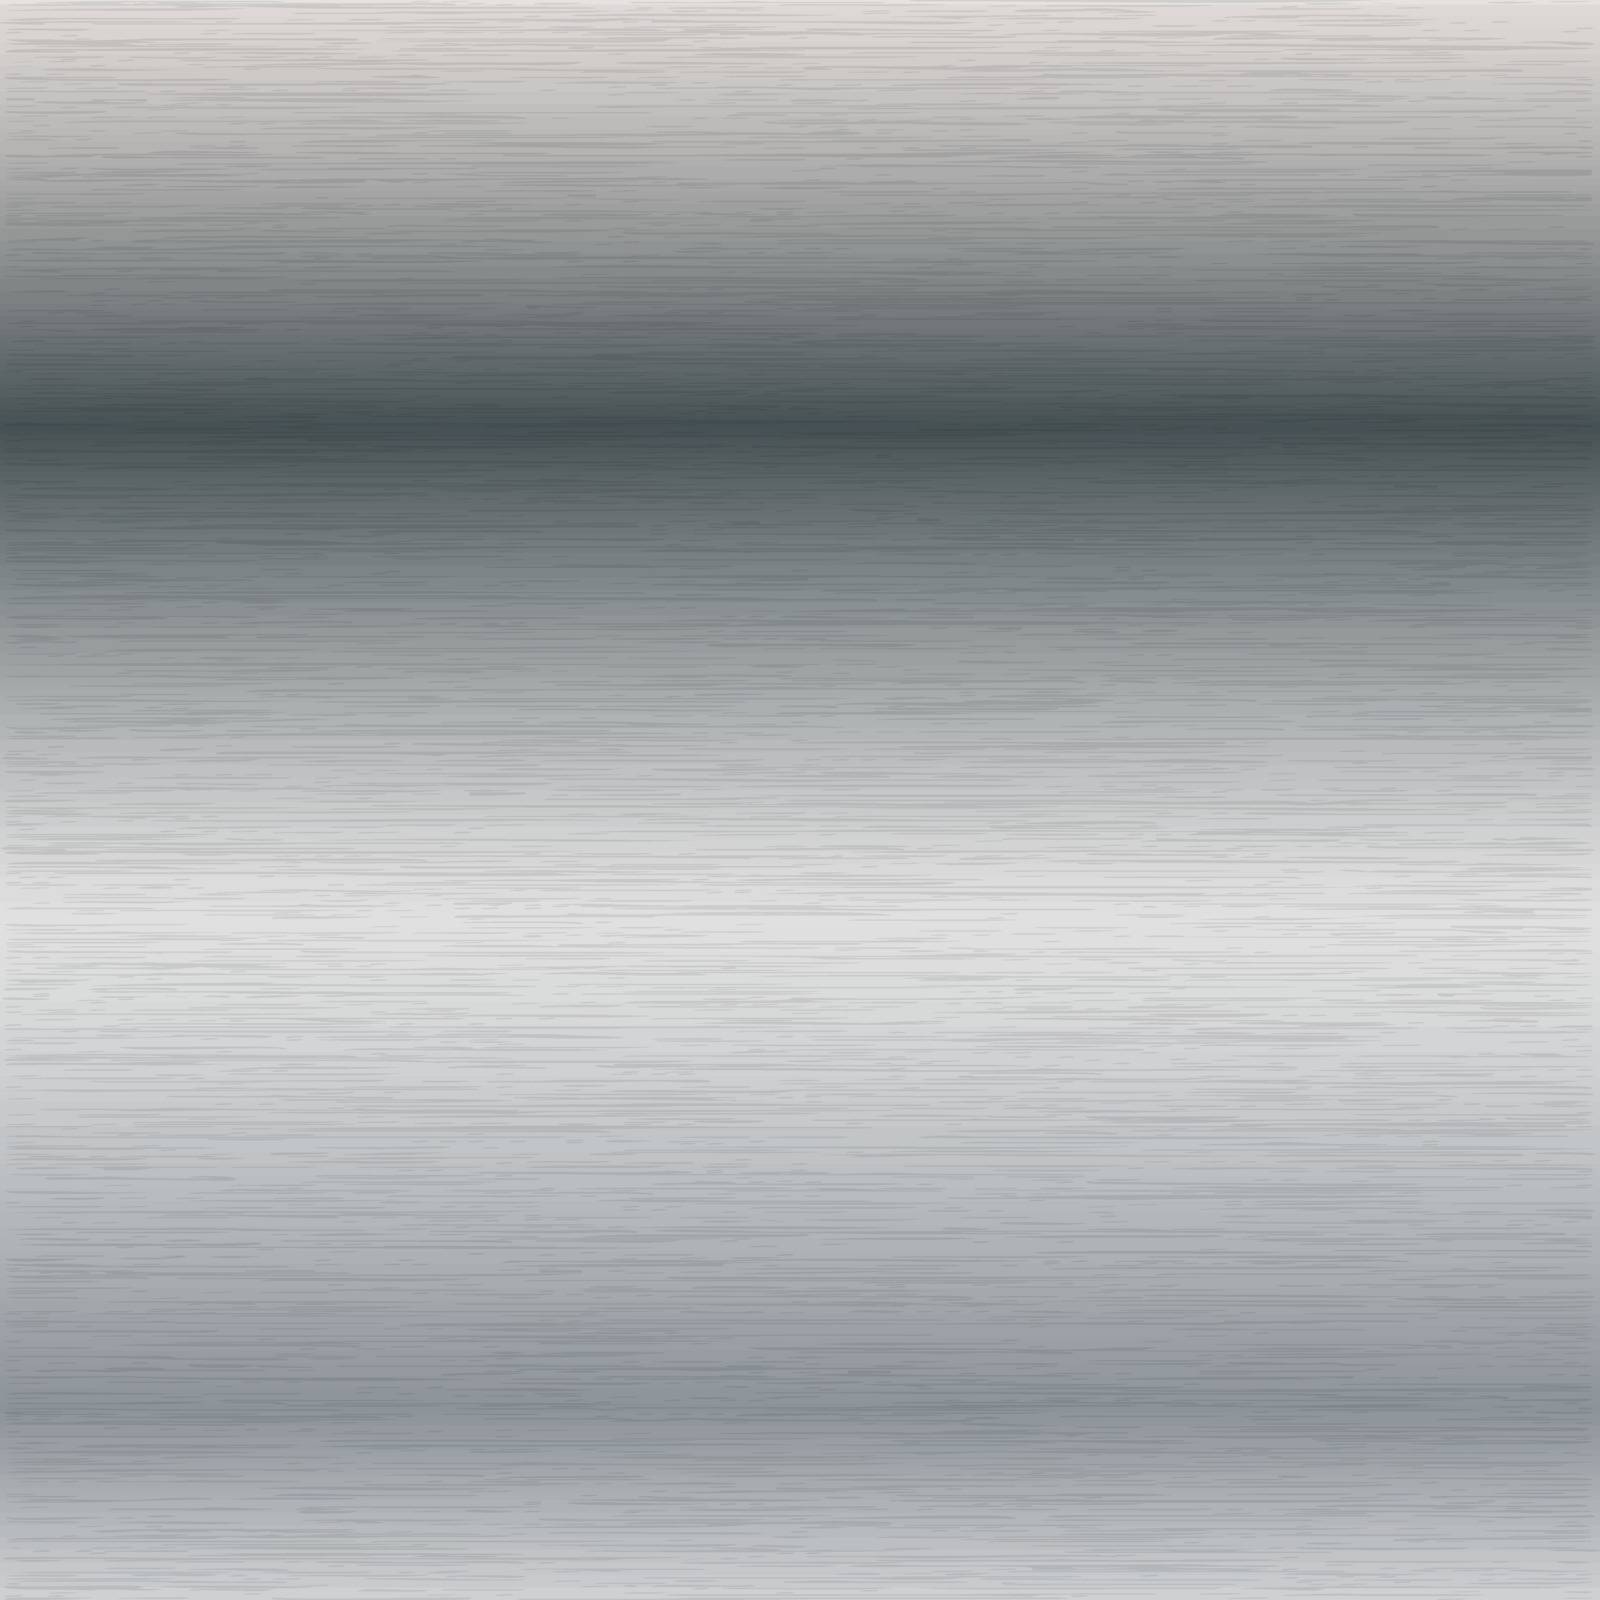 brushed steel surface by Istanbul2009